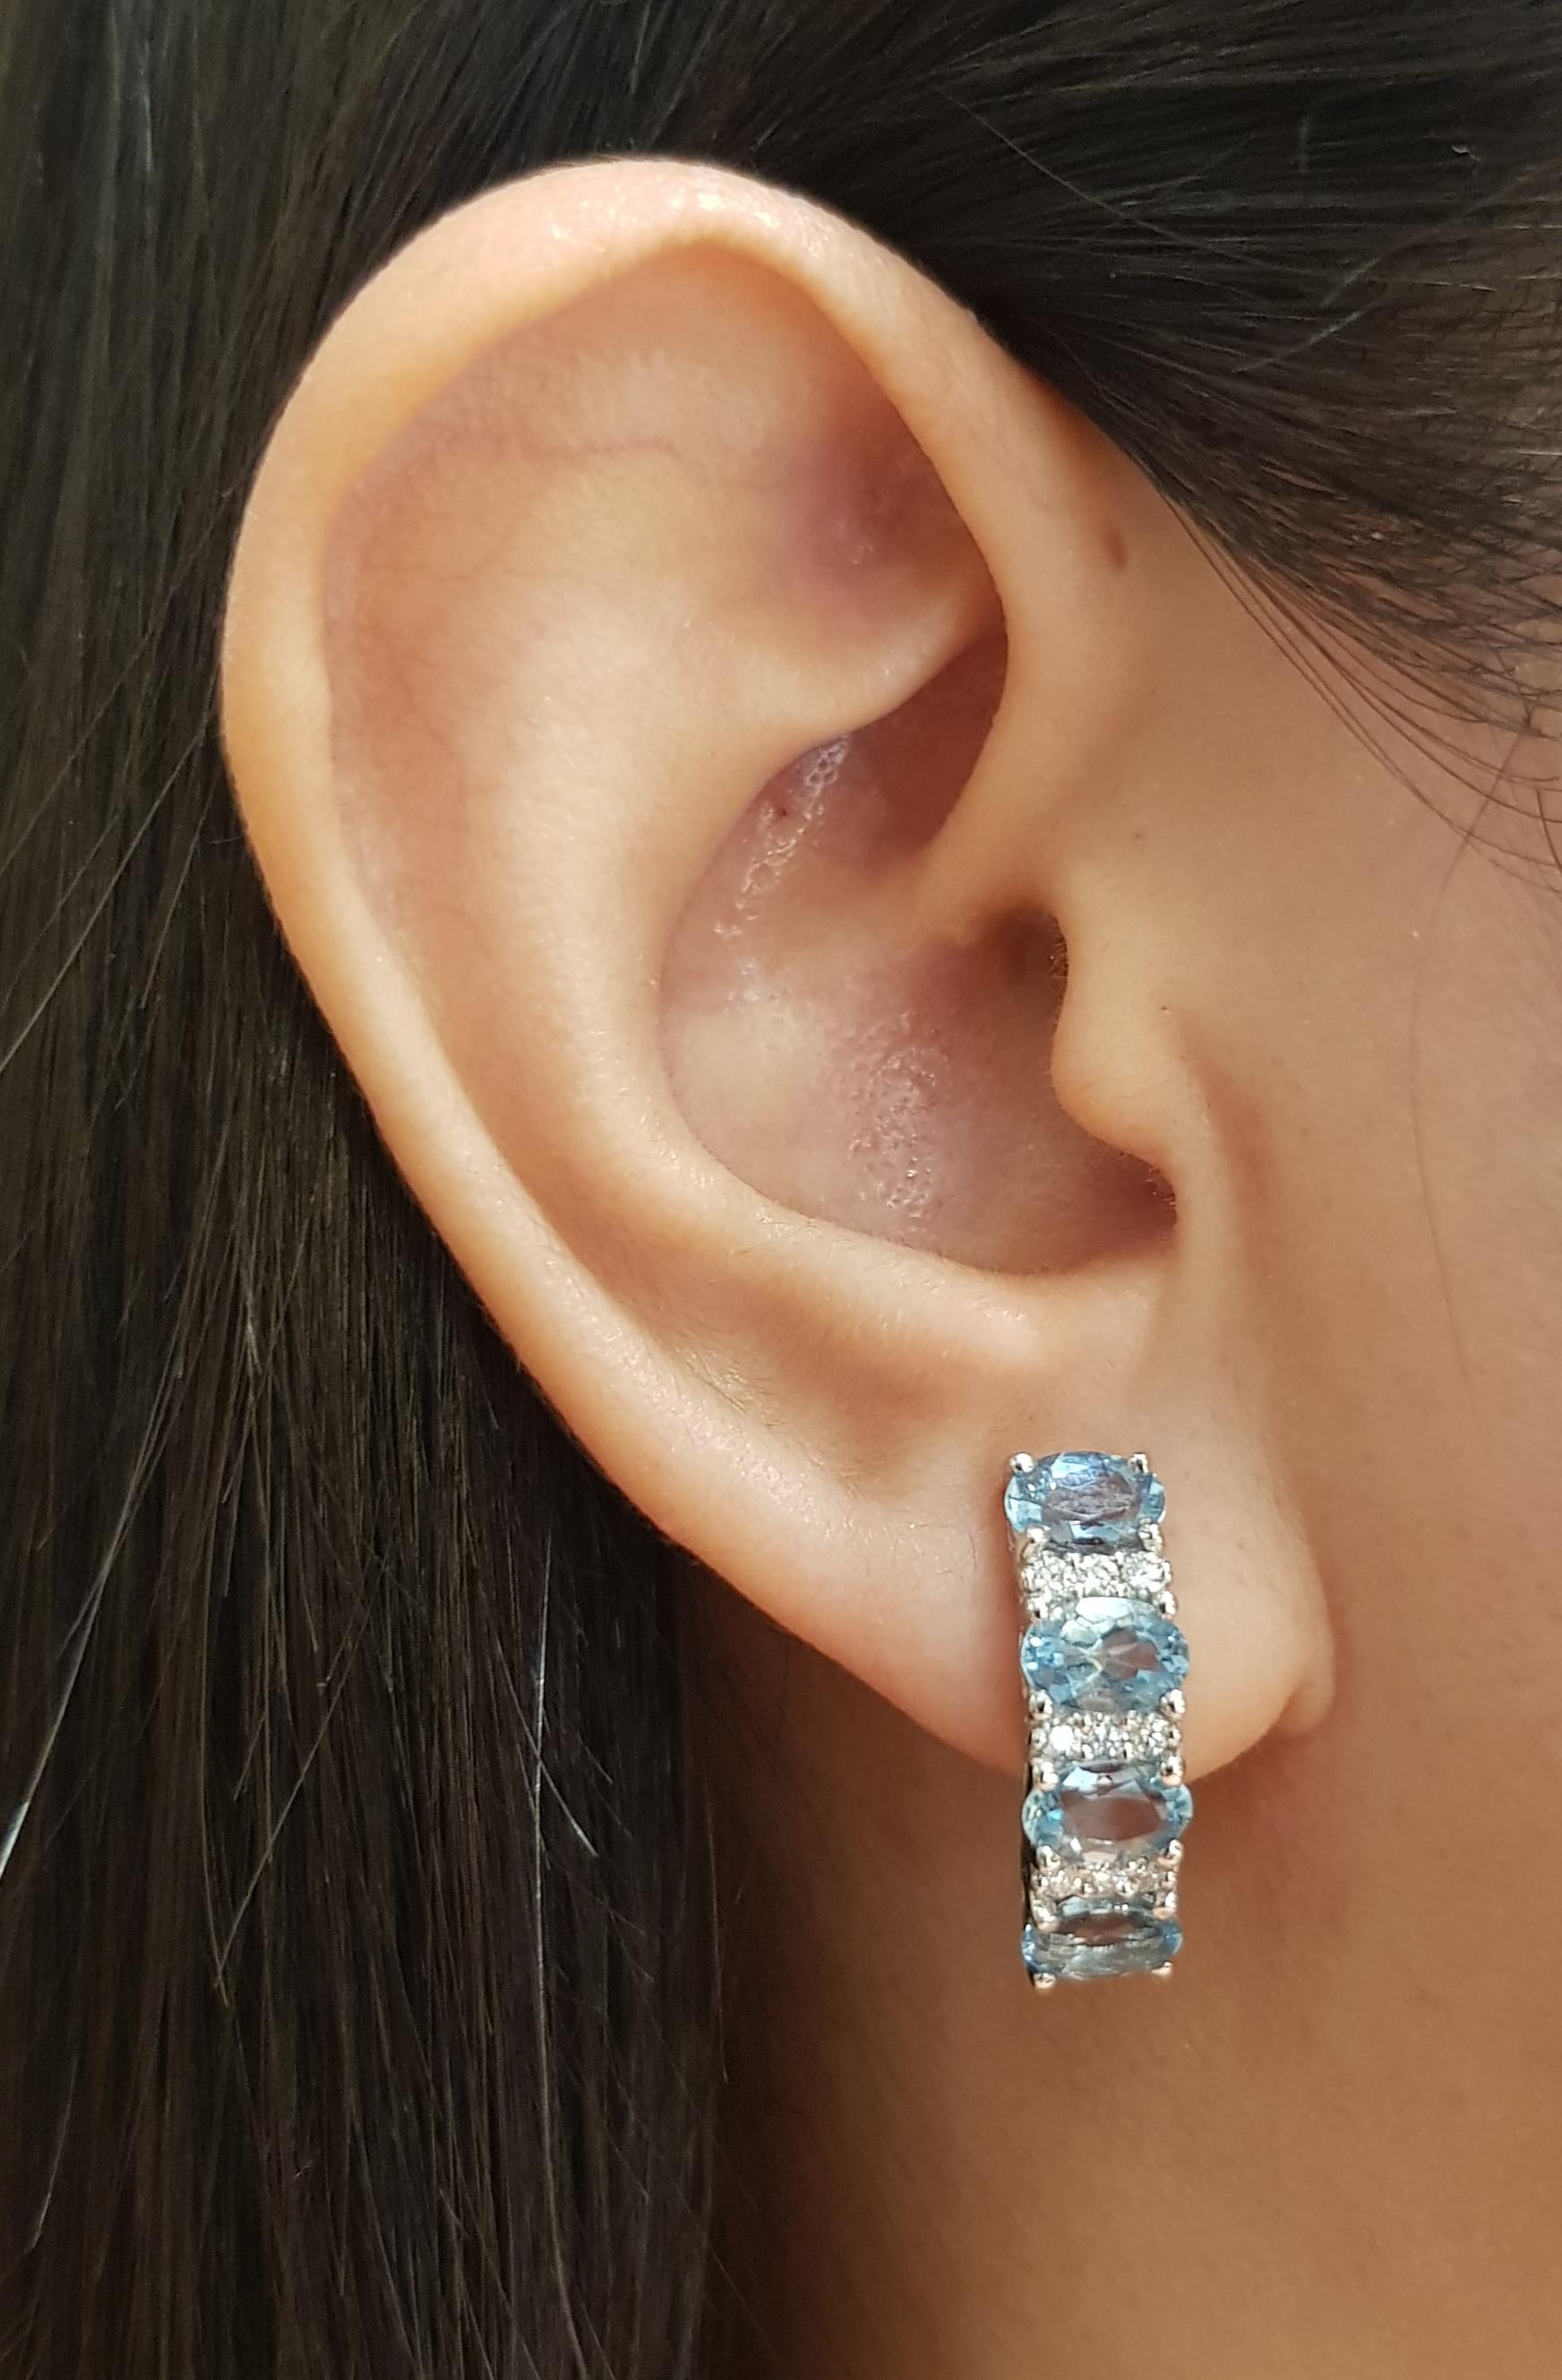 Aquamarine 3.05 carats with Diamond 0.31 carat Earrings set in 18K White Gold Settings

Width: 0.6 cm 
Length: 1.9 cm
Total Weight: 6.67 grams

